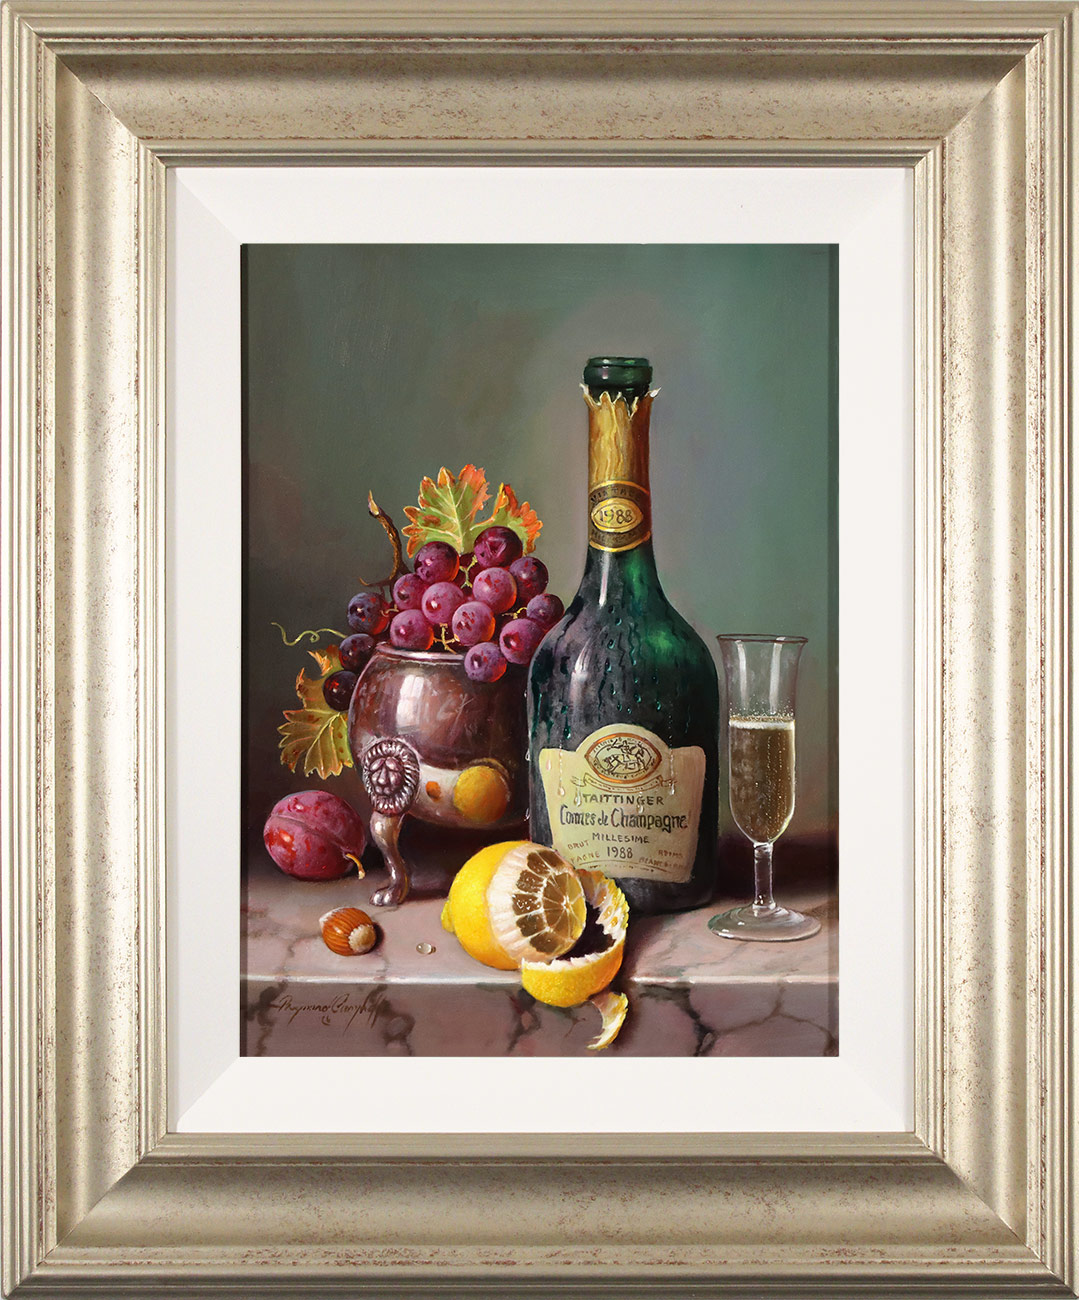 Raymond Campbell, Original oil painting on panel, Chilled Taittinger, 1988 Vintage Champagne Click to enlarge